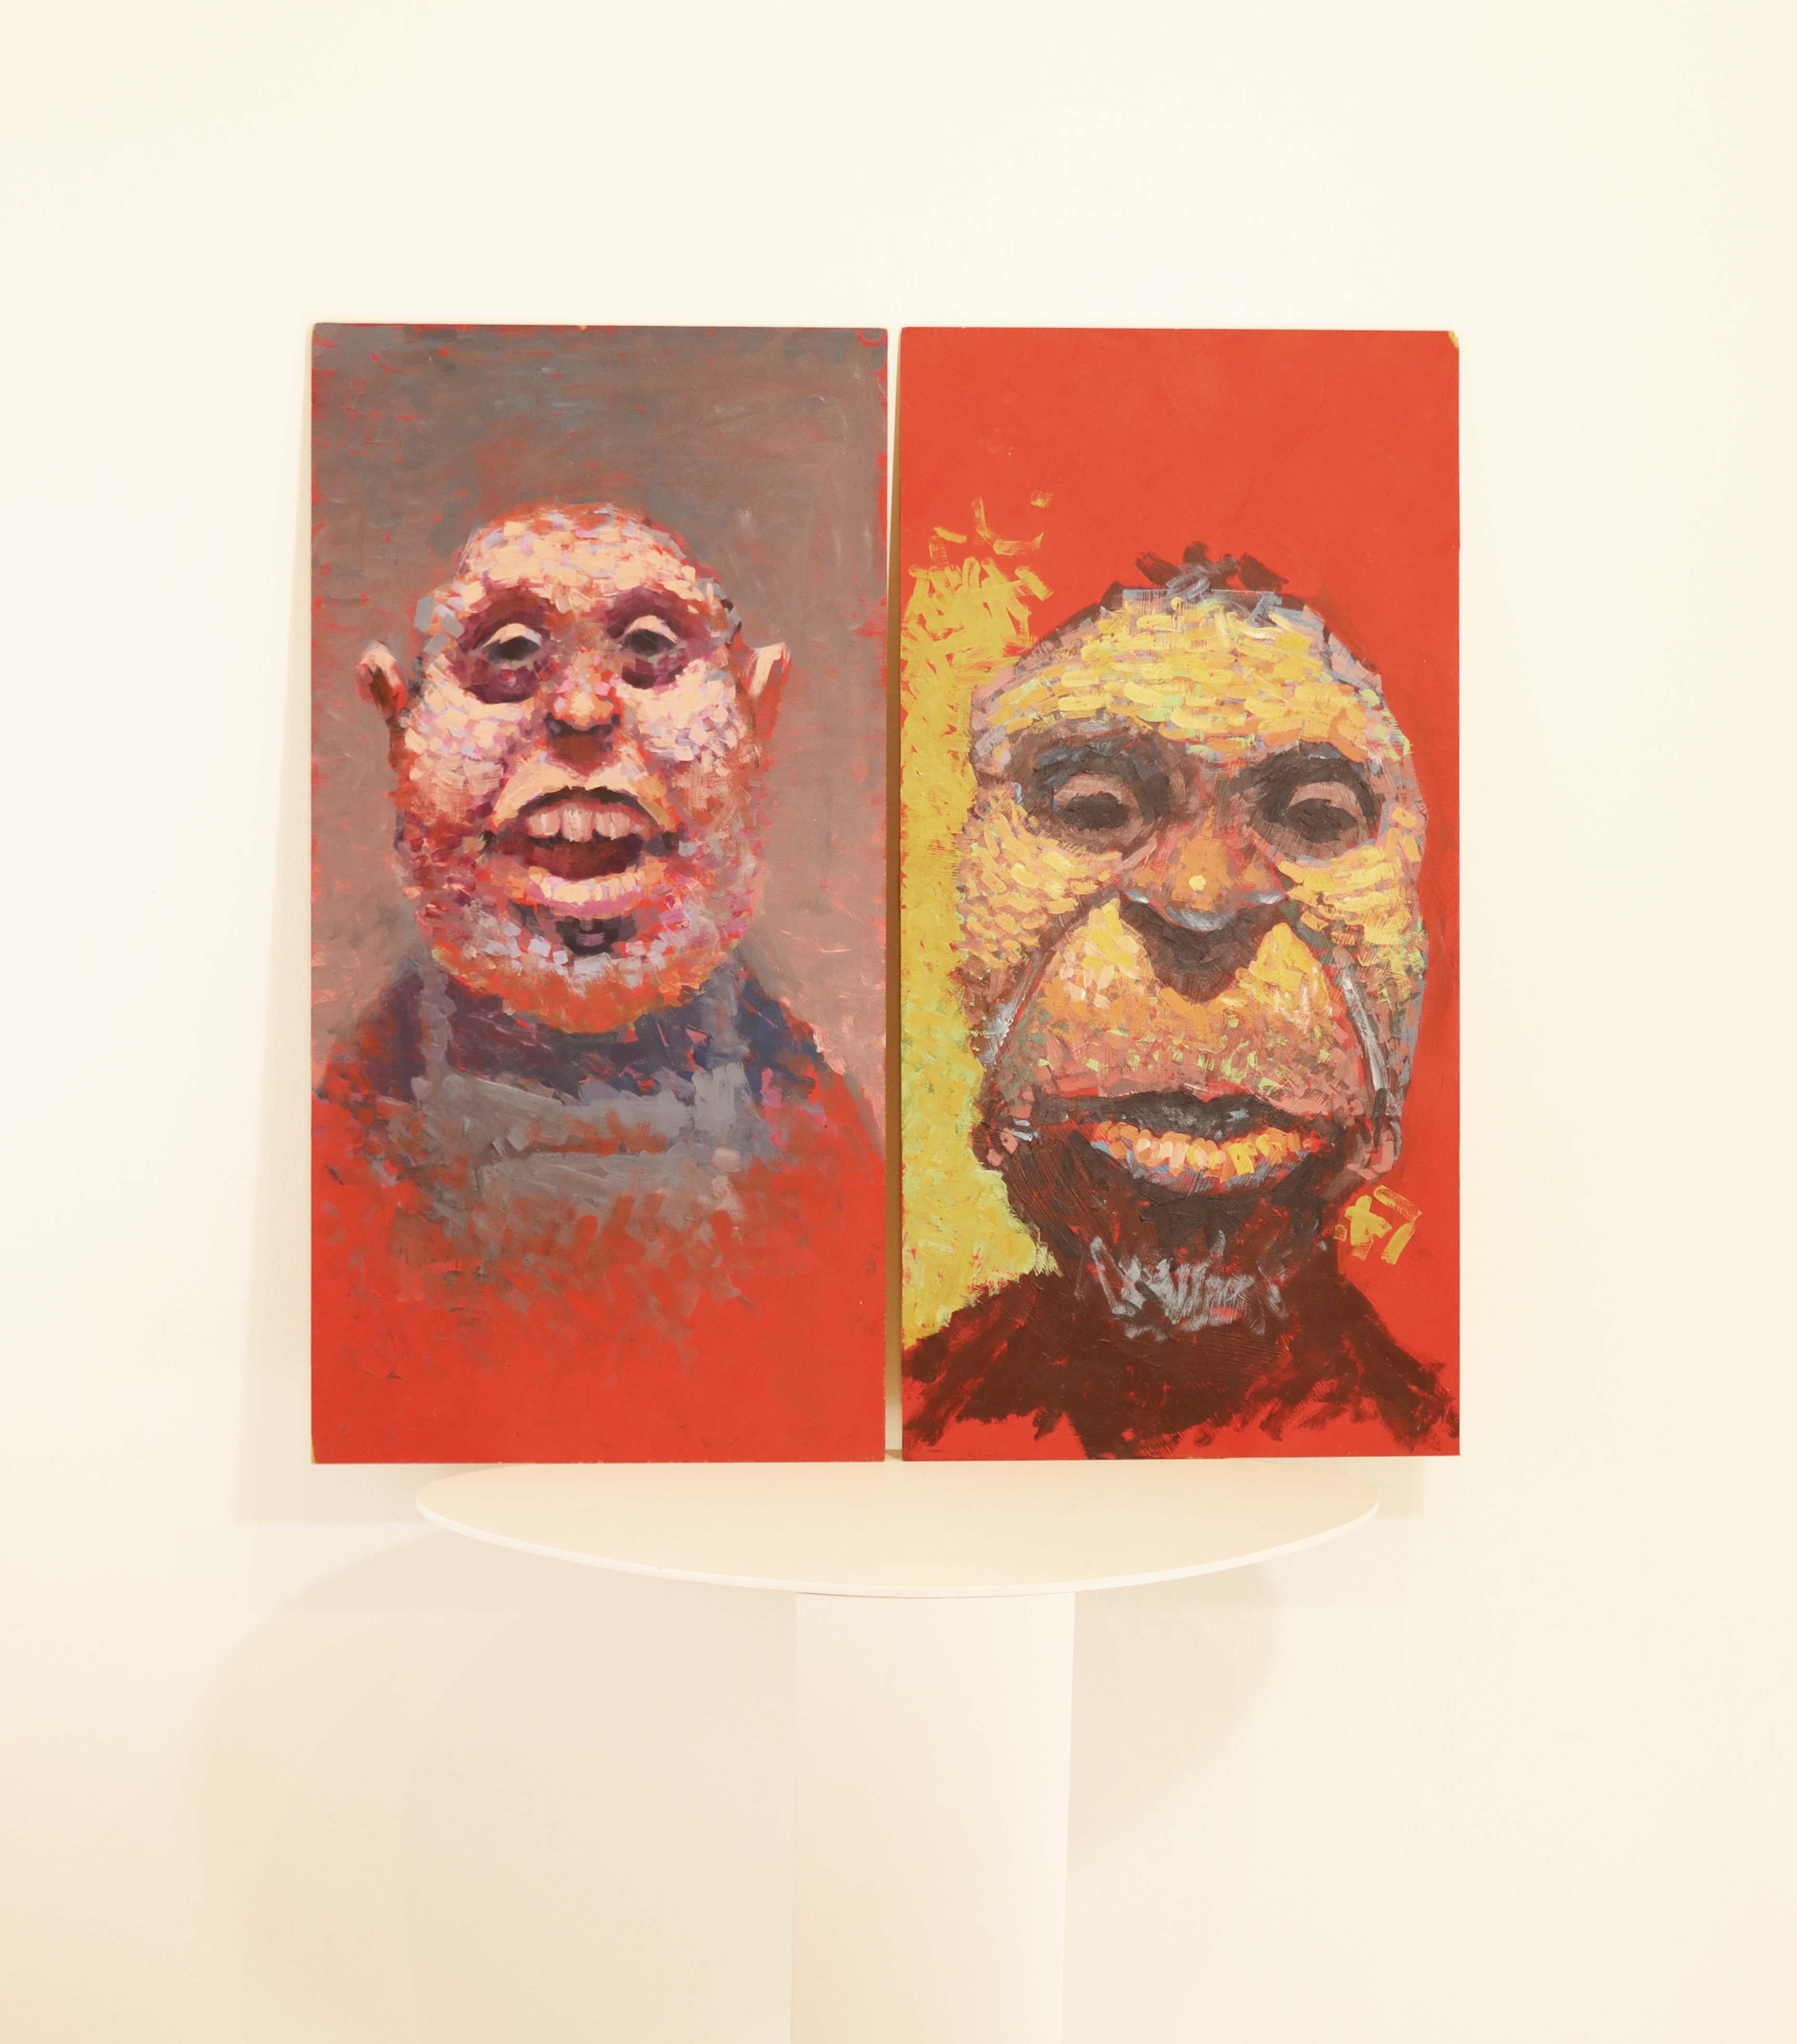 A contemporary pop surreal pair of portraits on wood panels by graffiti and street artist Kevin Peterson. Hand signed by the artist on the verso. Created in 2003. The portraits are edgy caricatures emerging from a bright lime green and crimson